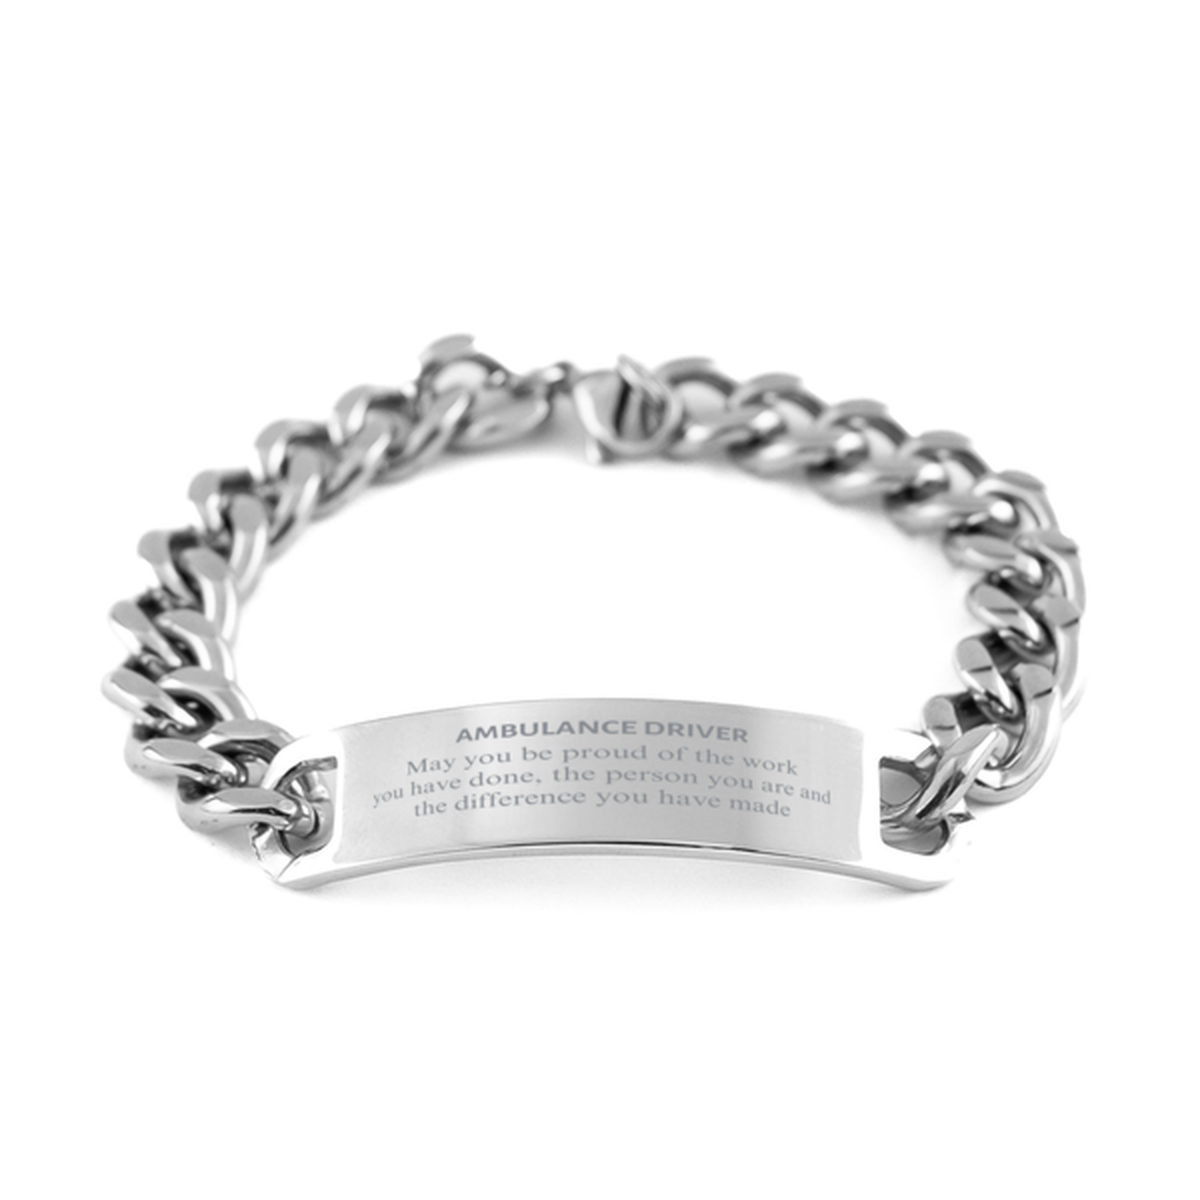 Ambulance Driver May you be proud of the work you have done, Retirement Ambulance Driver Cuban Chain Stainless Steel Bracelet for Colleague Appreciation Gifts Amazing for Ambulance Driver